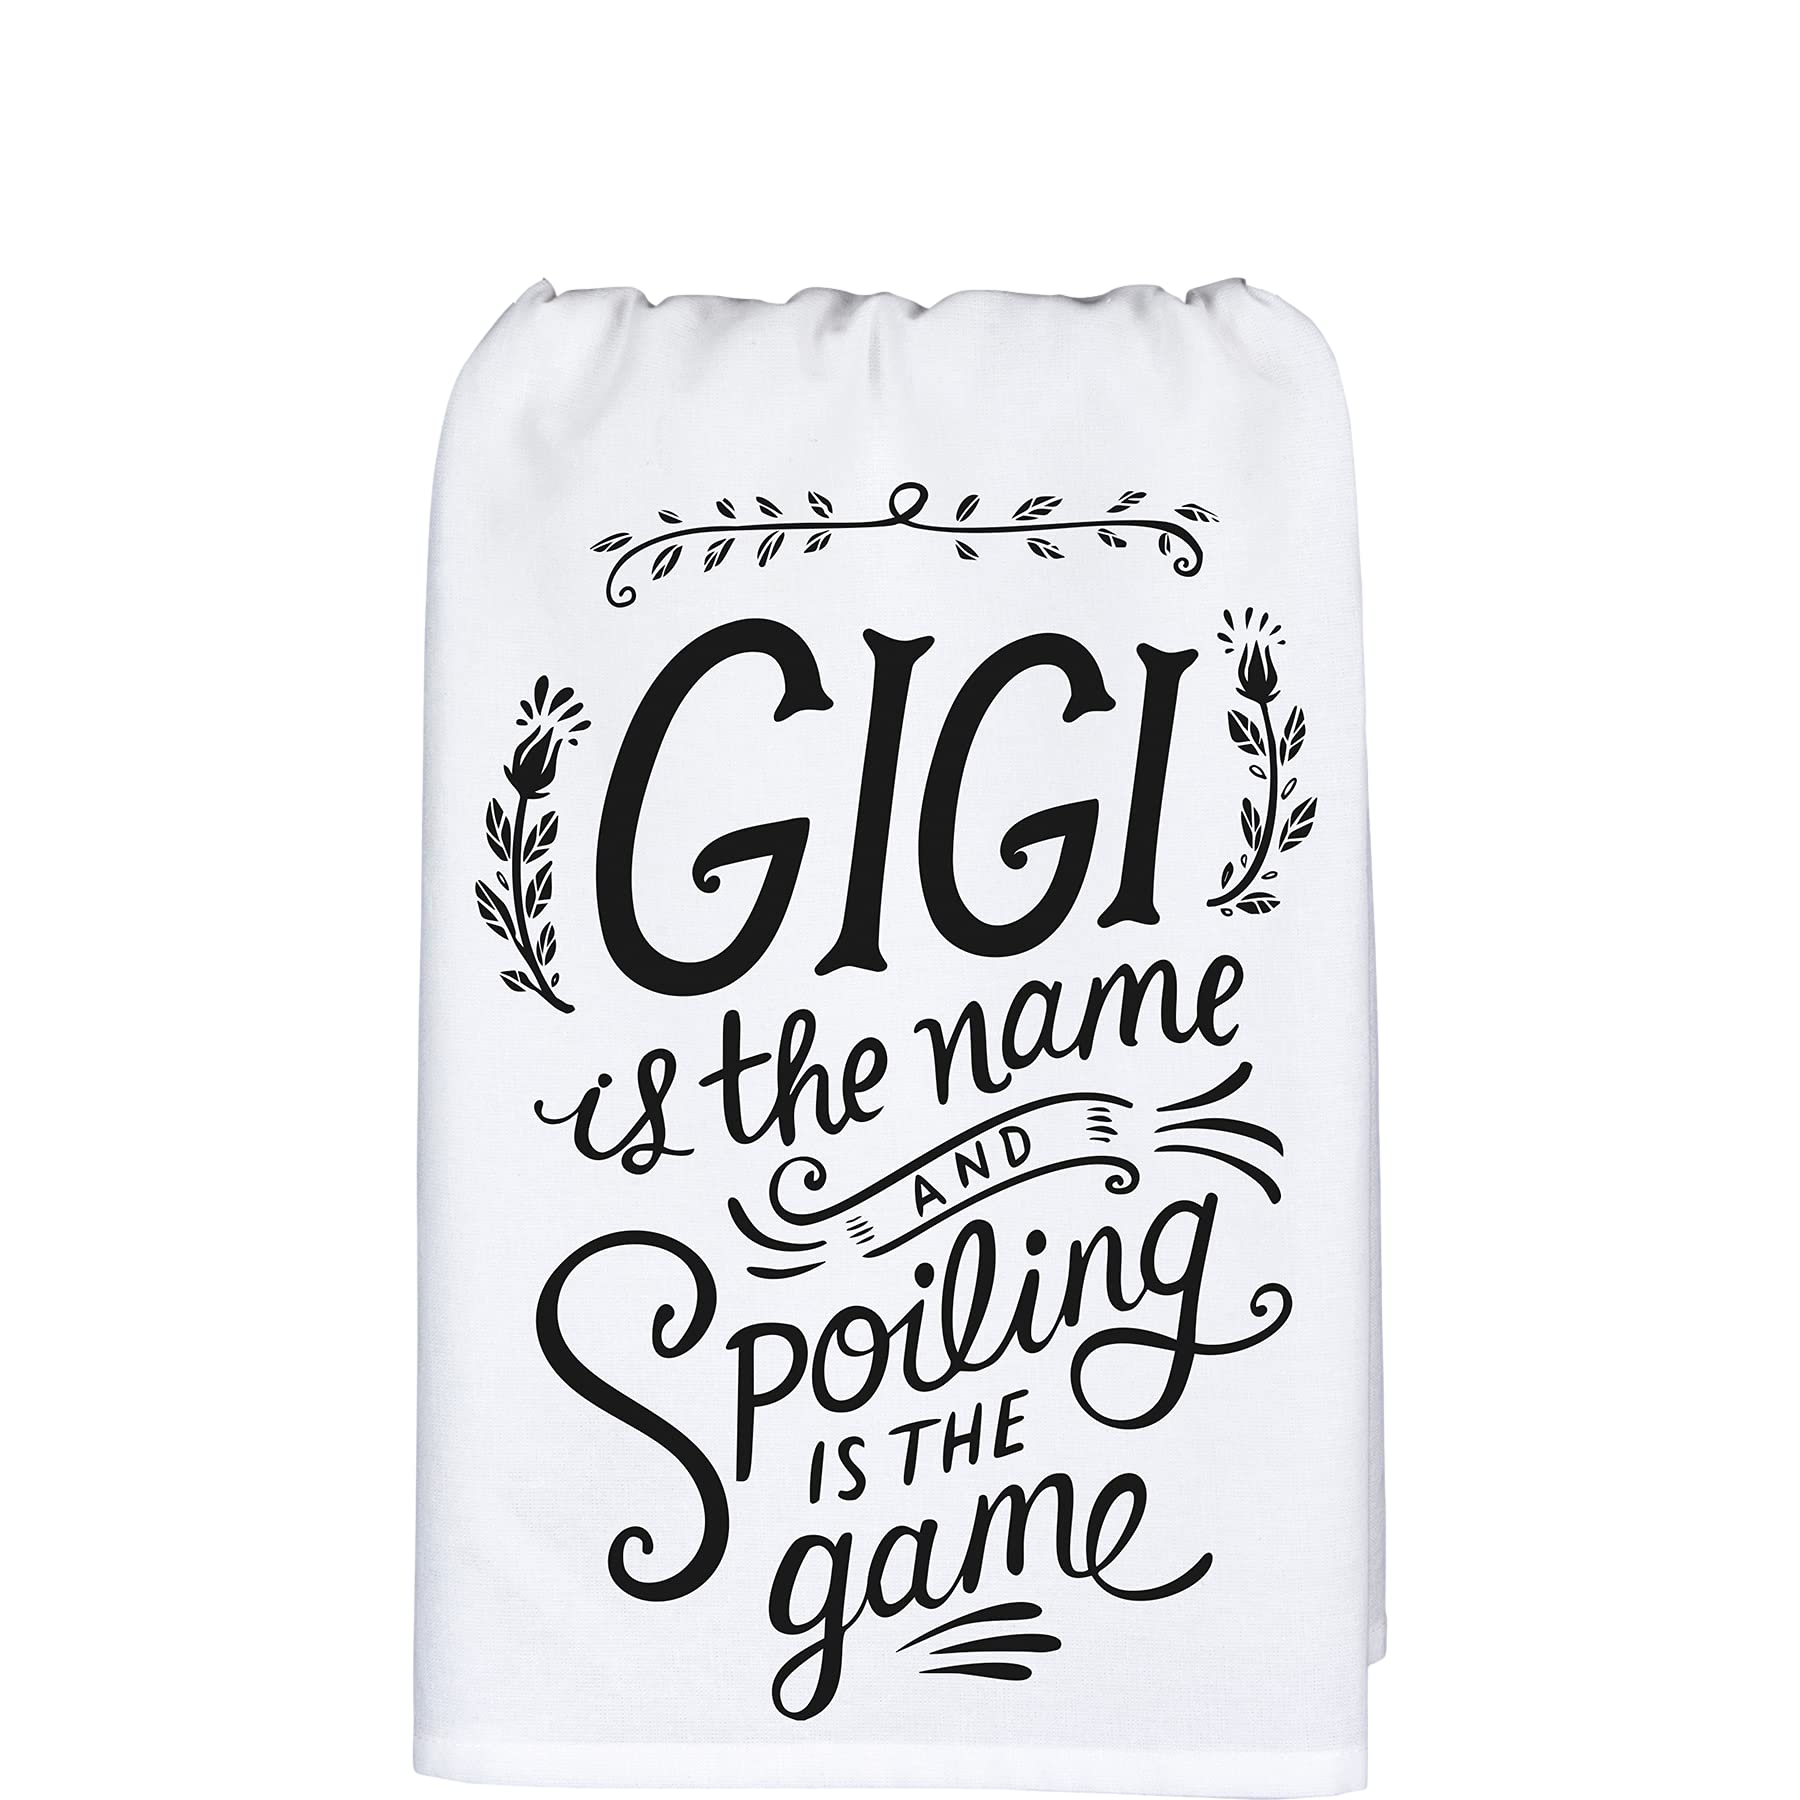 18TH STREET GIFTS Gigi Kitchen Towels and Refrigerator Magnet - Gigi Gifts for Grandma - Grandma Gifts from Grandchildren - New Grandmother Gifts